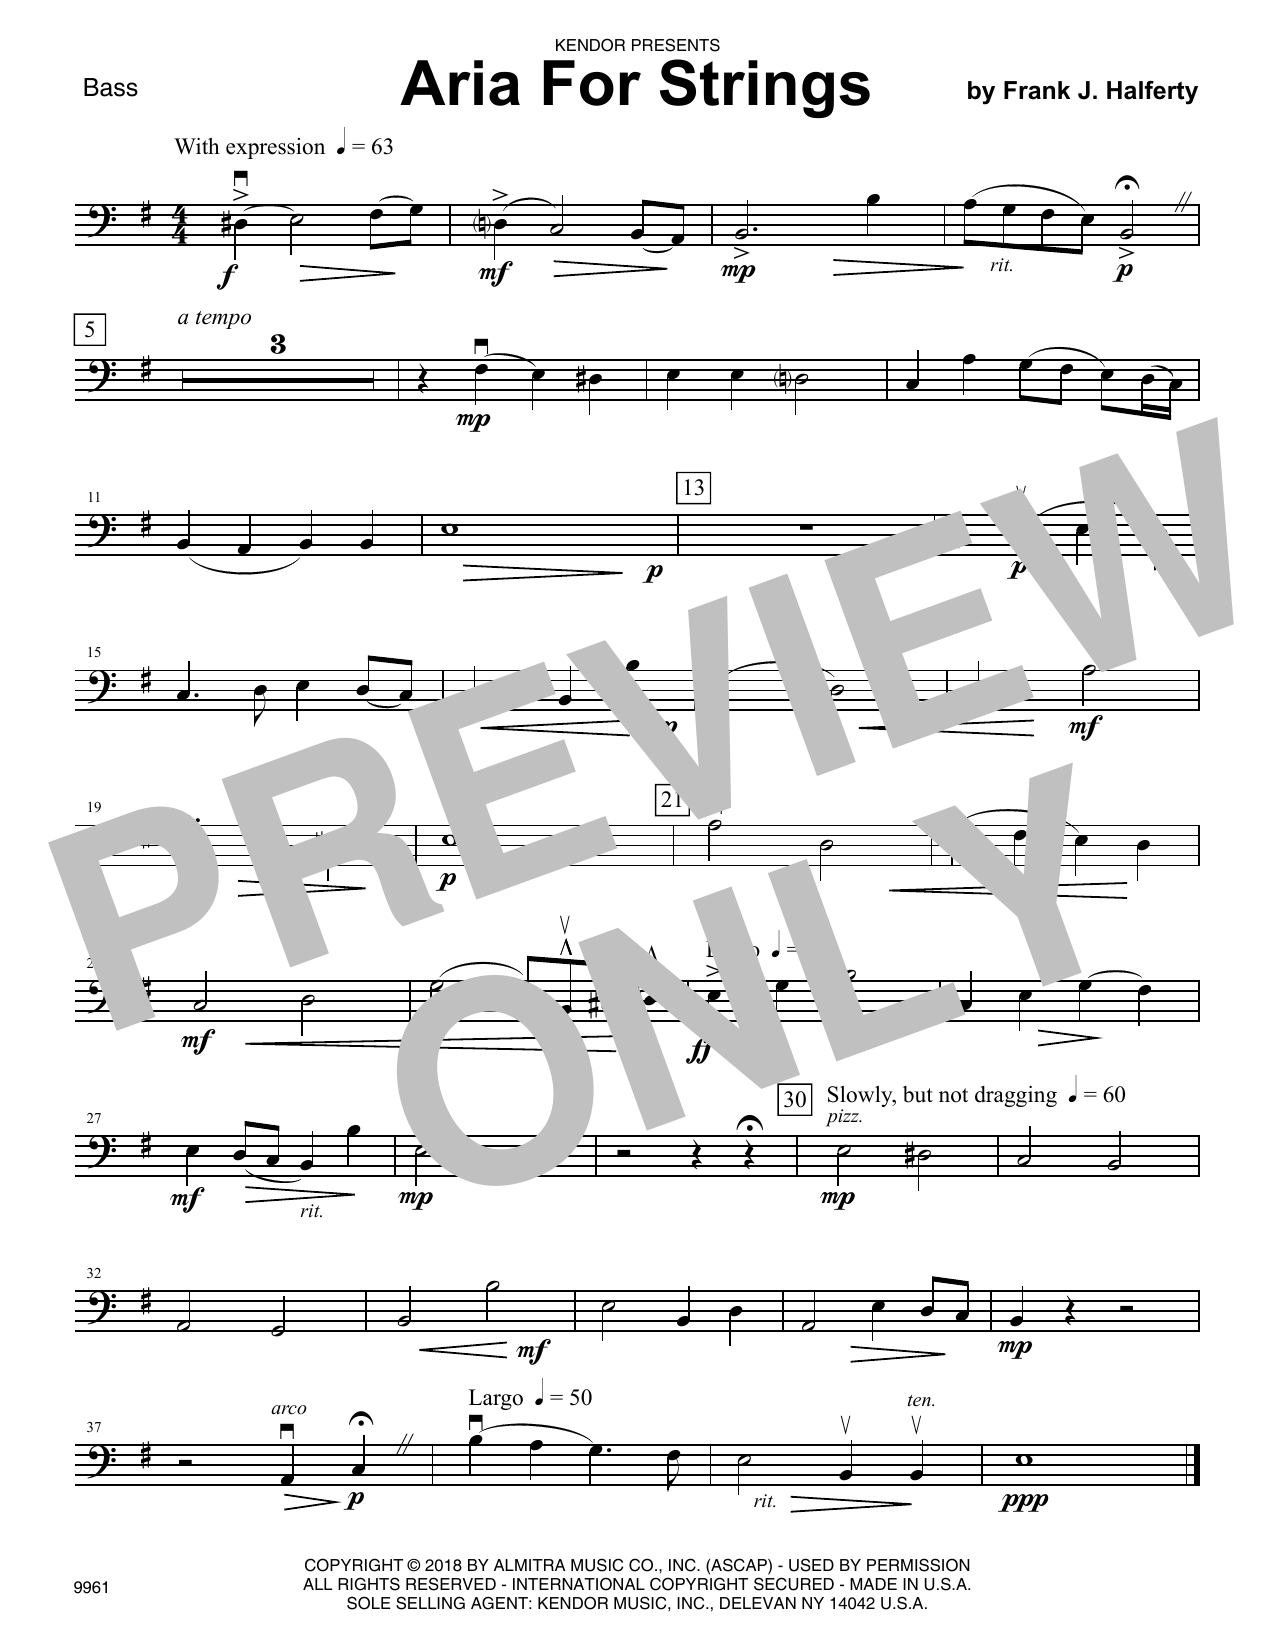 Frank J. Halferty Aria For Strings - Bass sheet music preview music notes and score for Orchestra including 1 page(s)